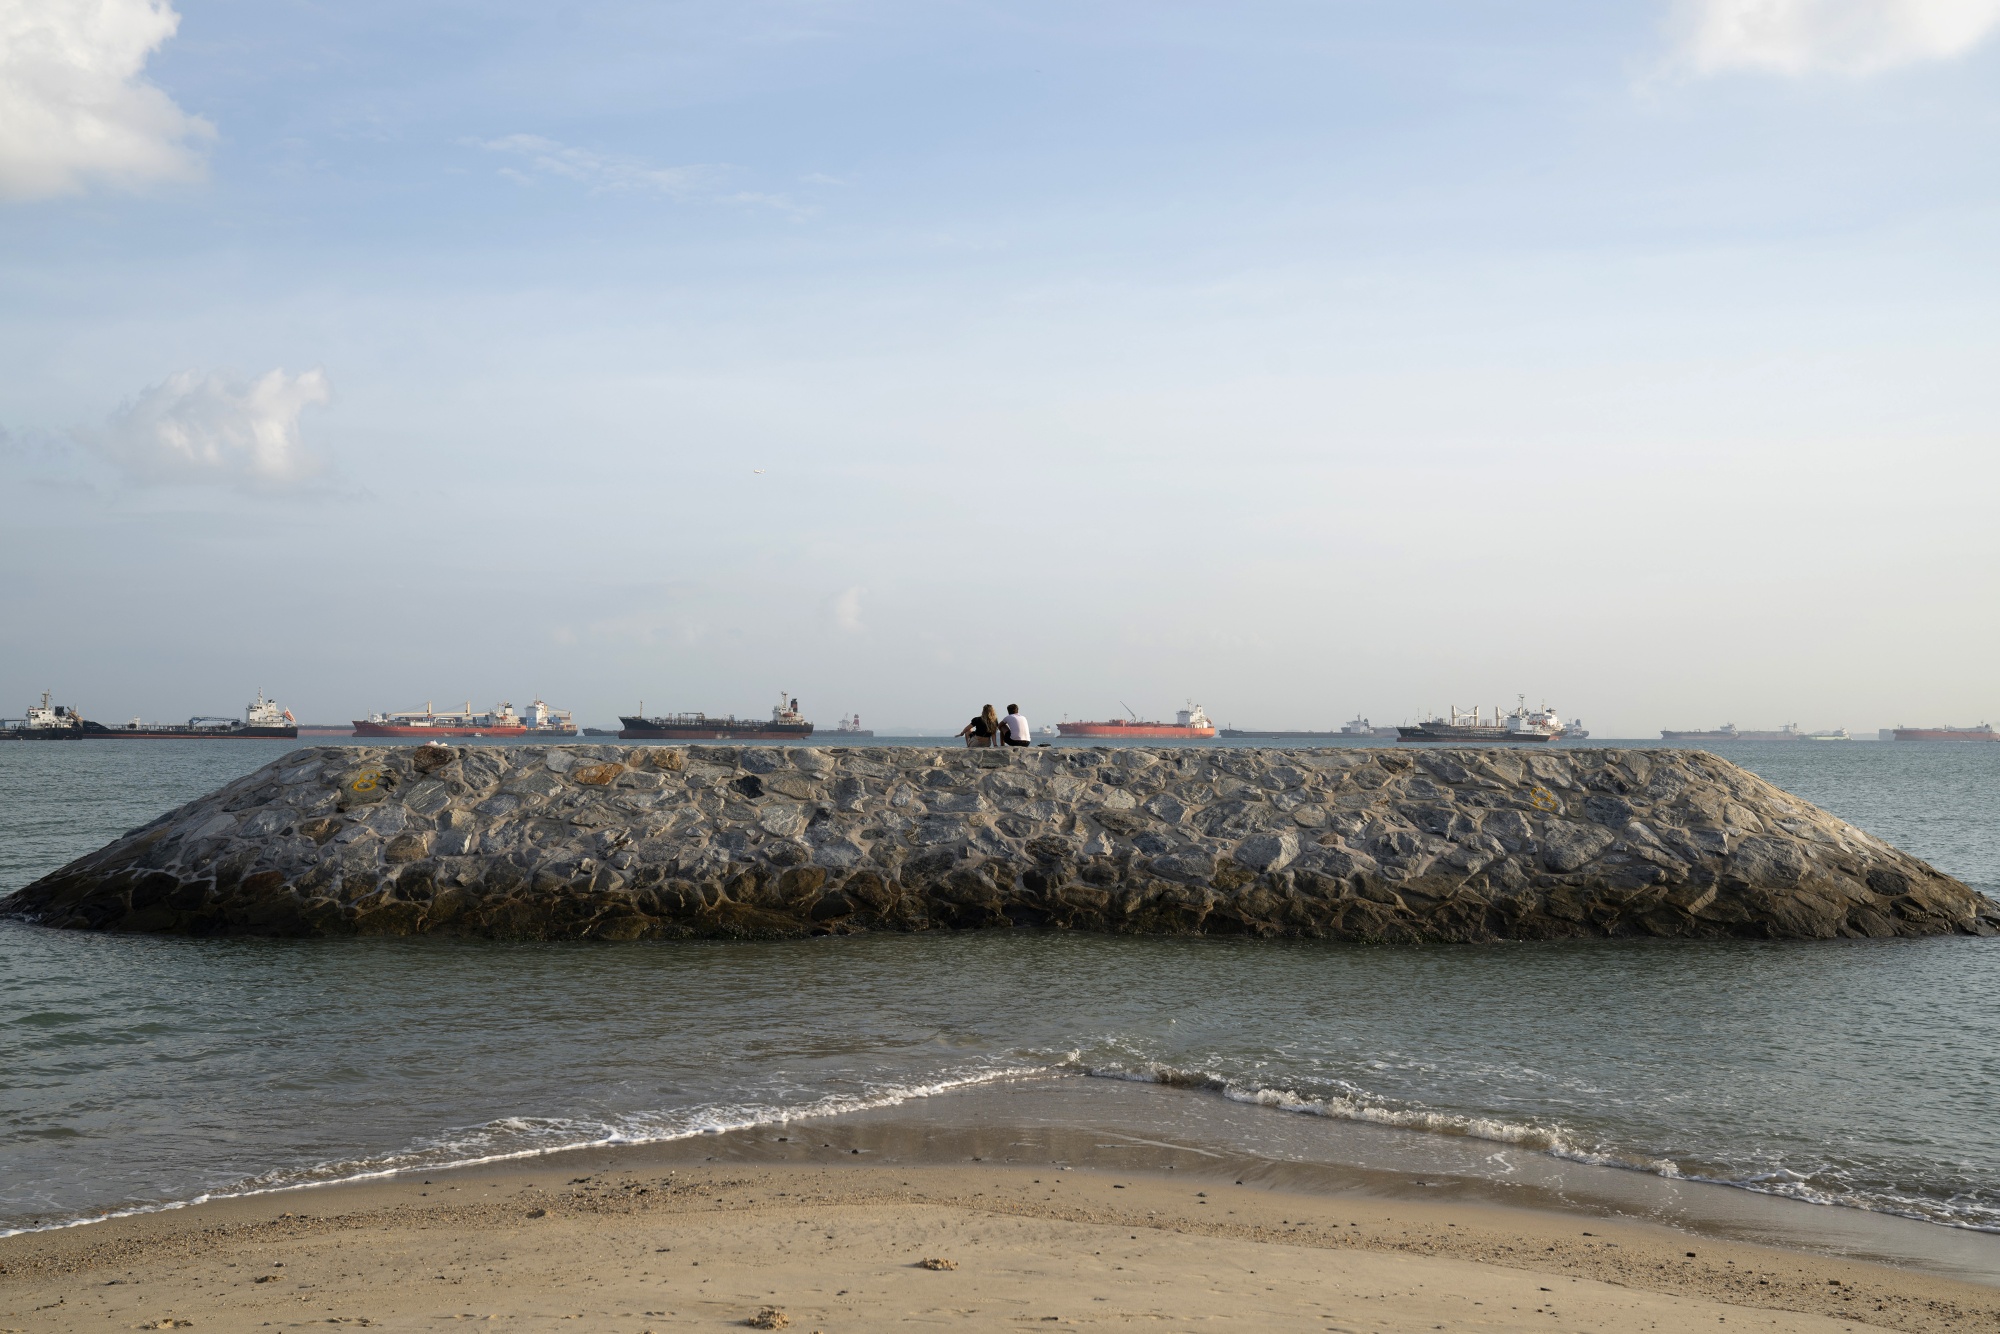 People look out to sea from&nbsp;a breakwater at East Coast Park, a stretch of&nbsp;reclaimed land along the southeastern coast of&nbsp;Singapore.